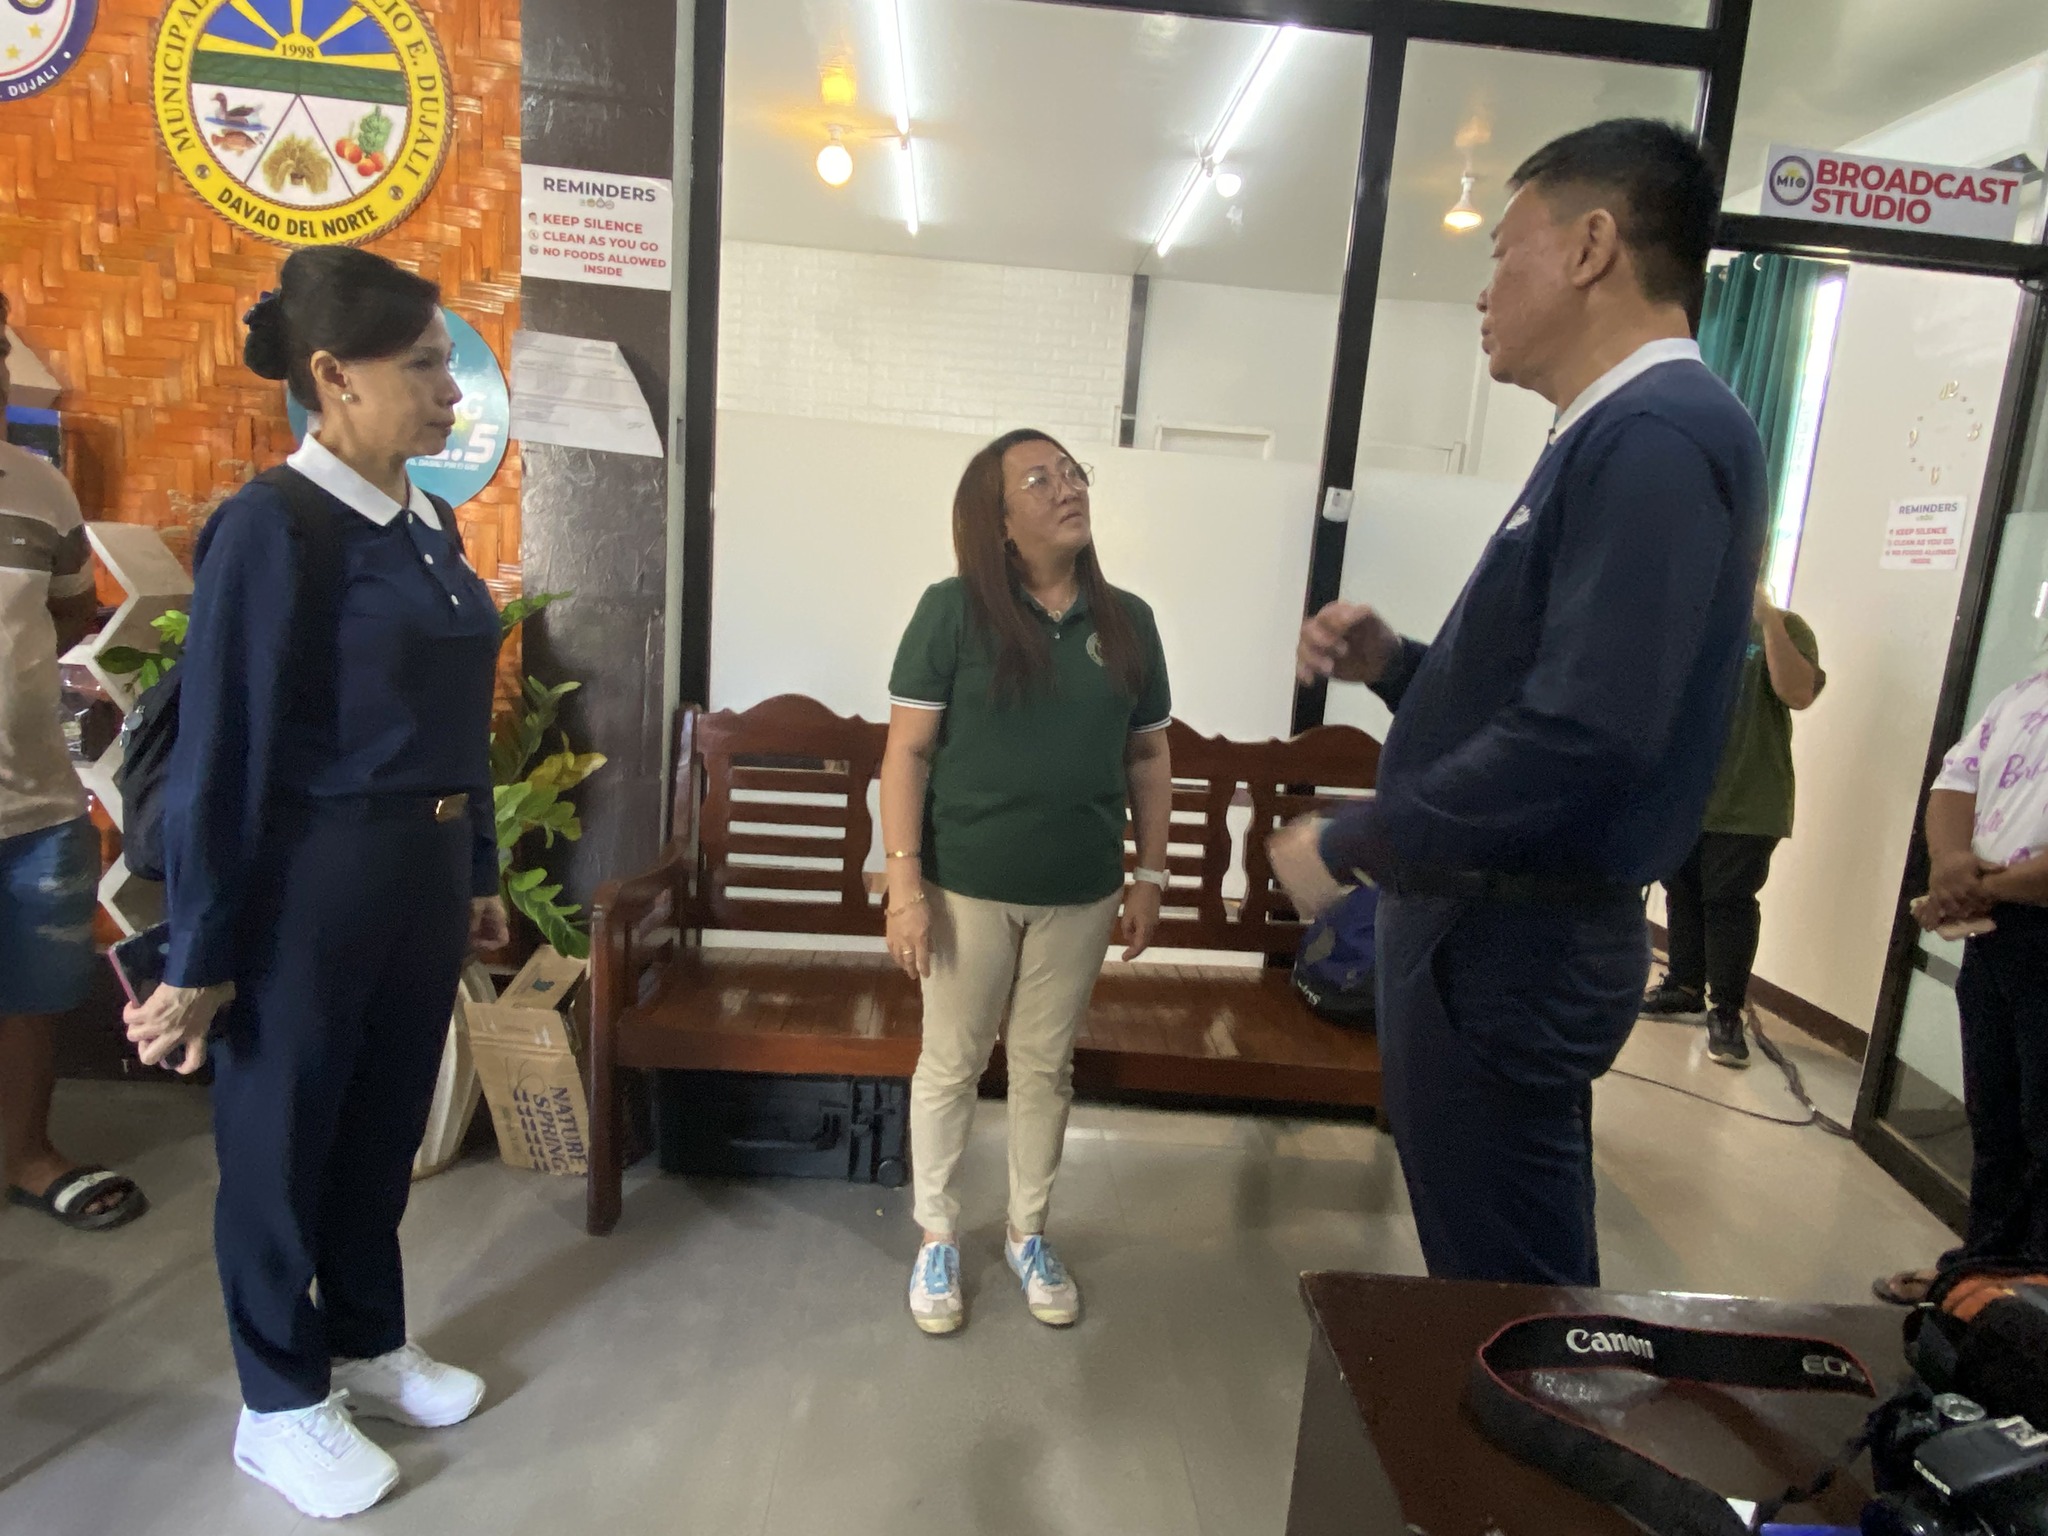 The meeting between the Municipal Social Welfare and Development Officer of Dujali, Ms. Angelina P. Taculin, RSW and the Tzu Chi Commissioners, Bro. Nelson Chua and Sis. Mei Yuen Ang, focused on the current challenges and needs of their Municipality.【Photo by Tzu Chi Davao】